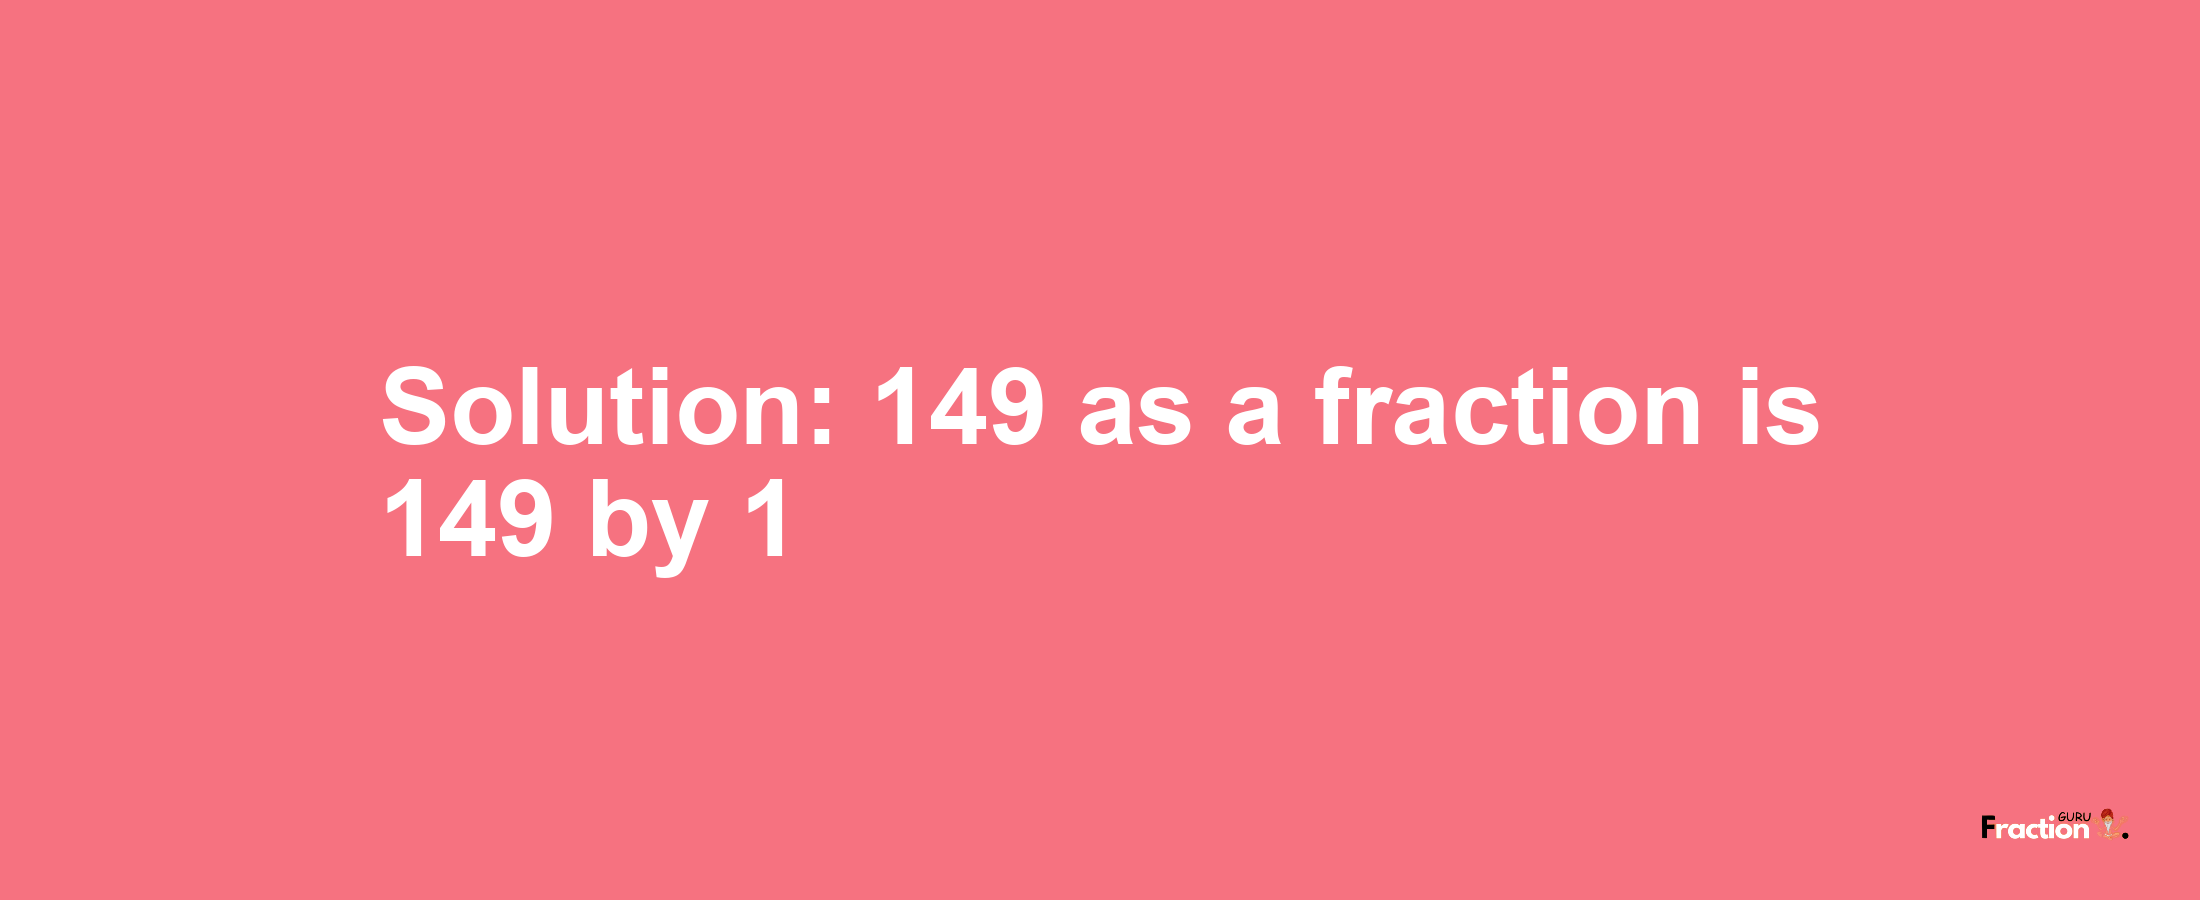 Solution:149 as a fraction is 149/1